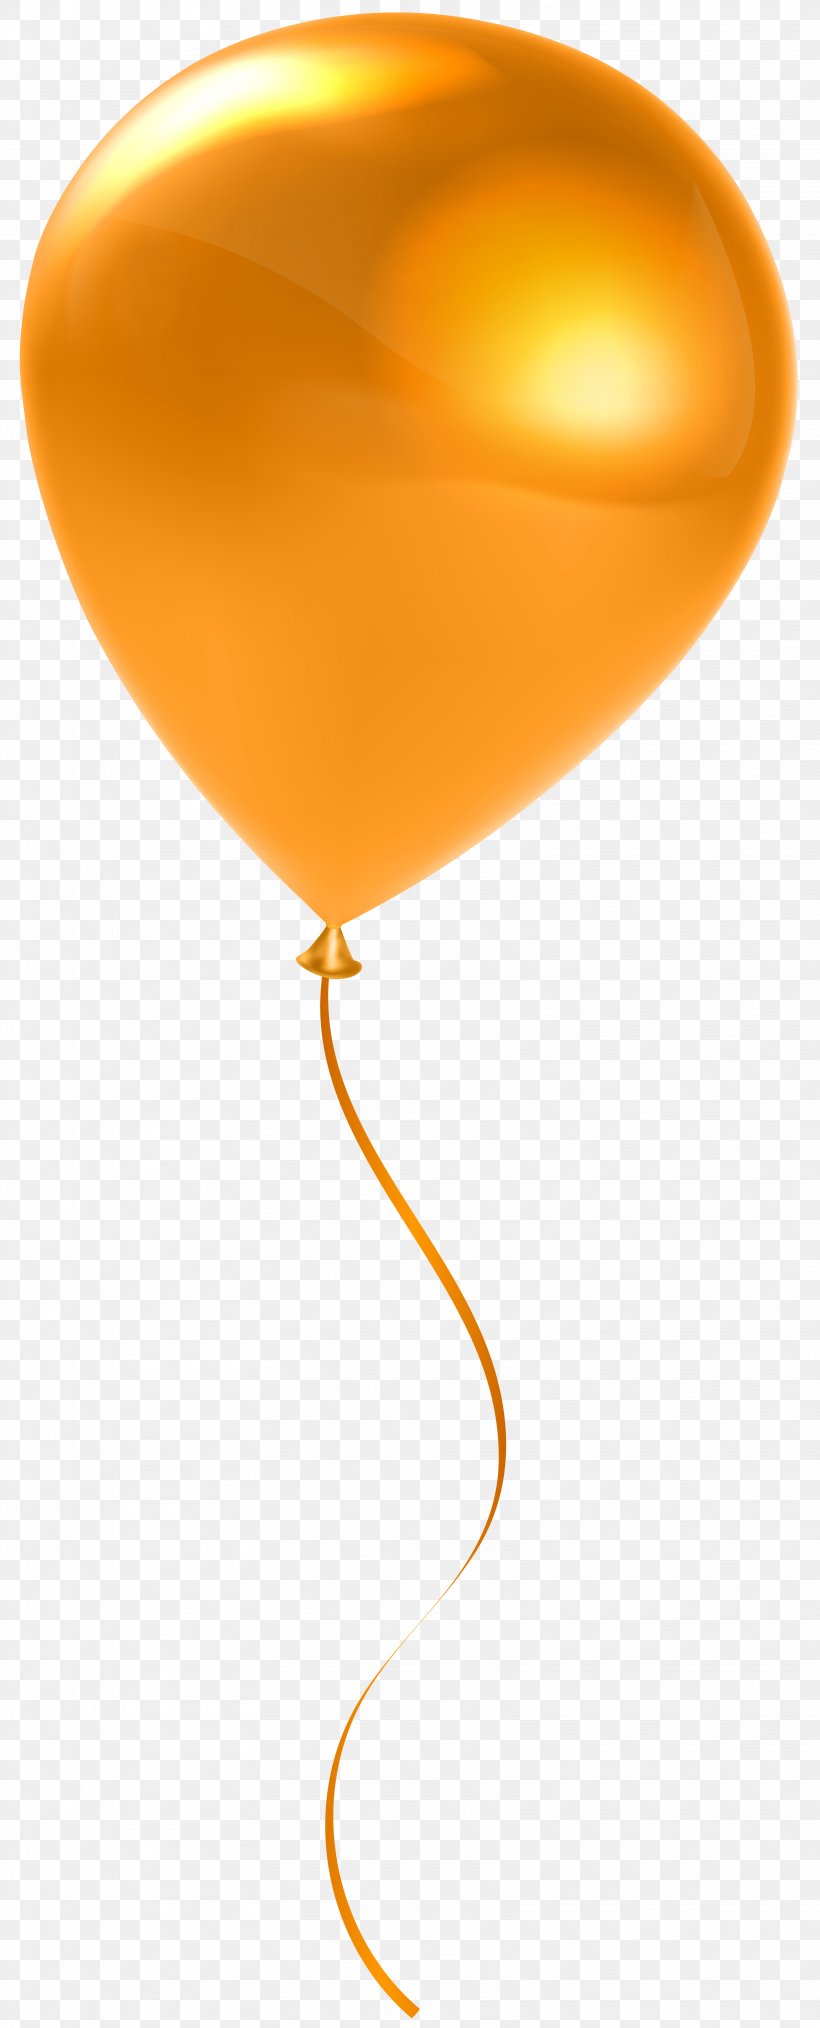 Balloon Stock Photography Orange Clip Art, PNG, 3234x8000px, Balloon, Blue, Color, Orange, Pink Download Free